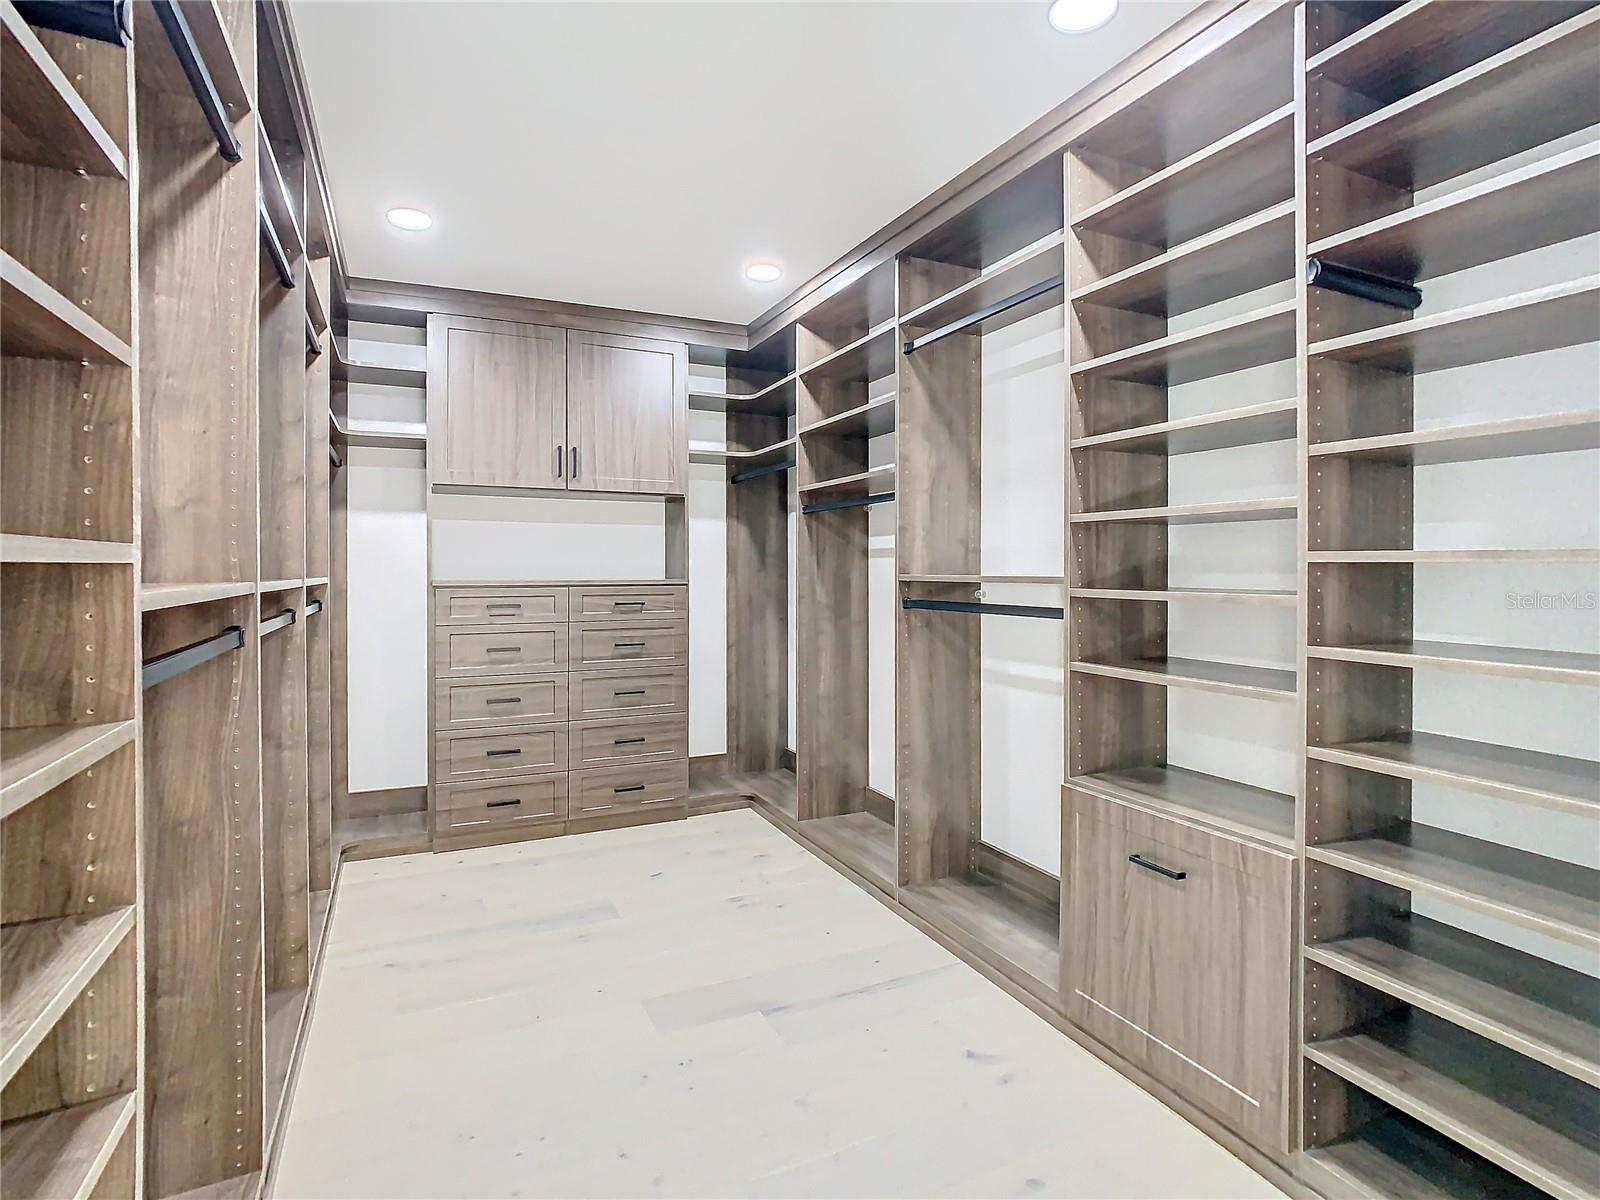 Primary Suite Closet with California Cabinetry